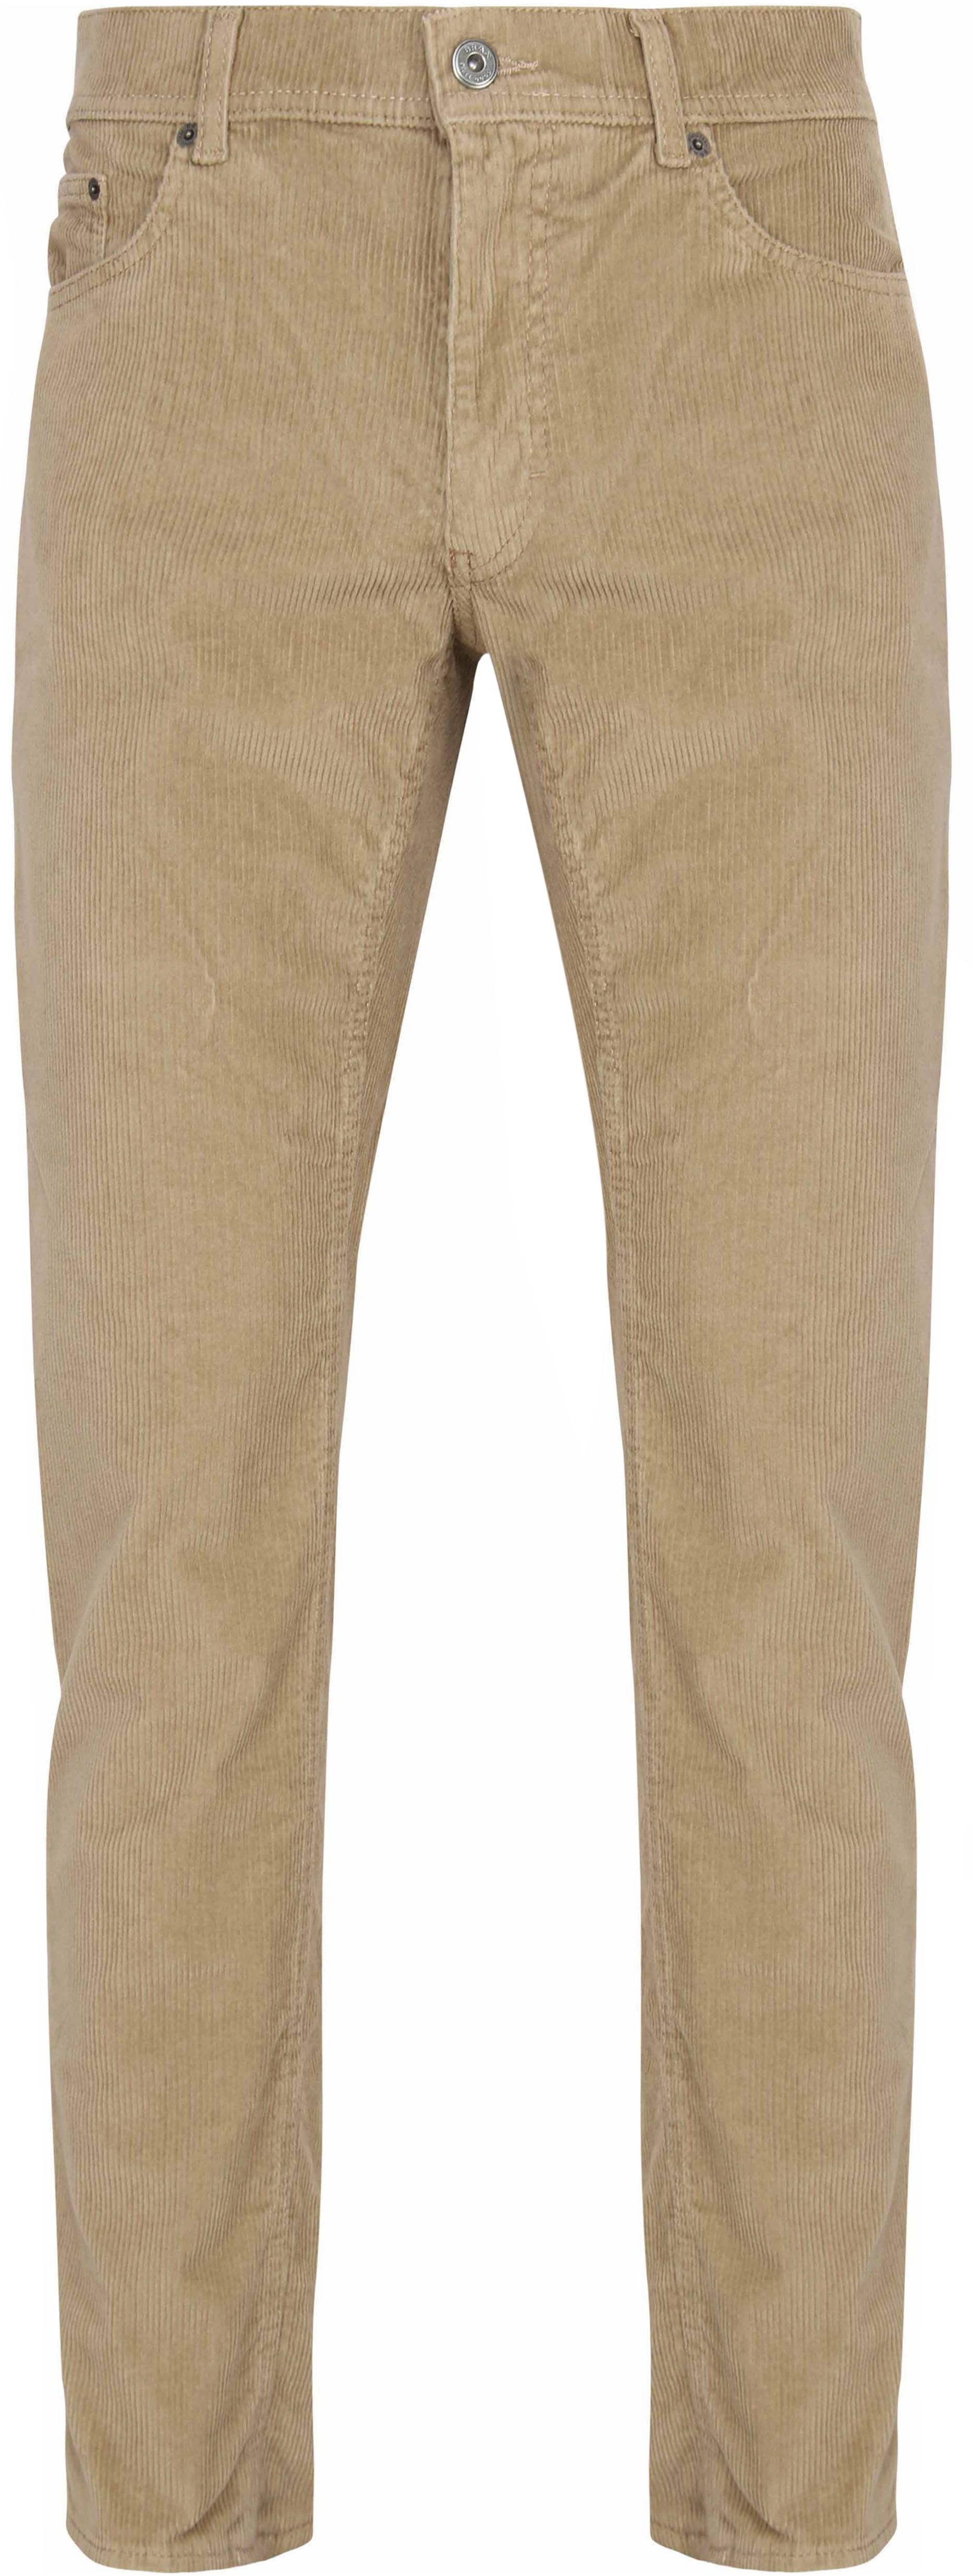 Brax Cooper Trousers Corduroy Beige size W 40 product